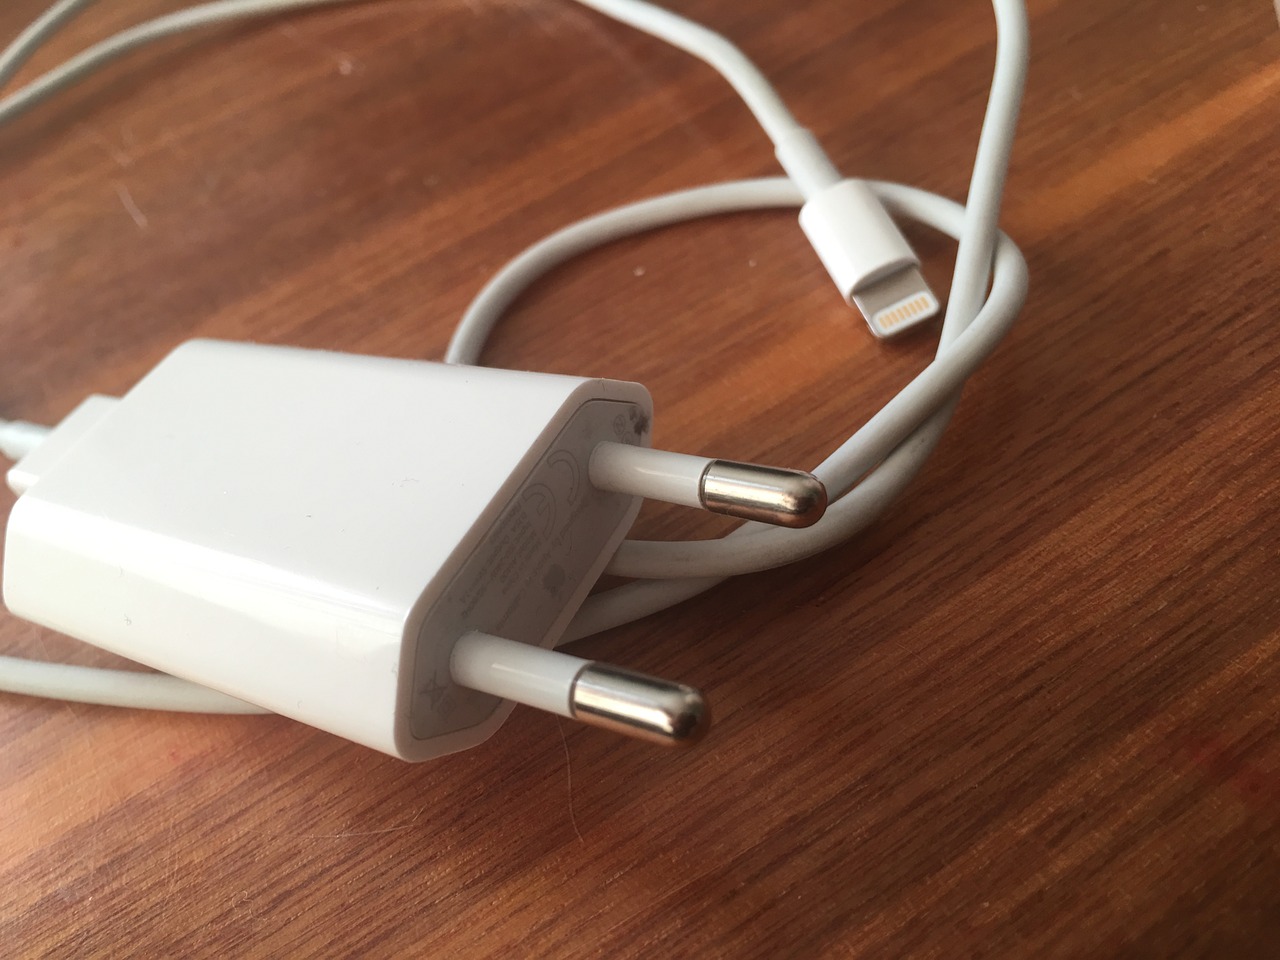 Apple to ditch lightning charging cable